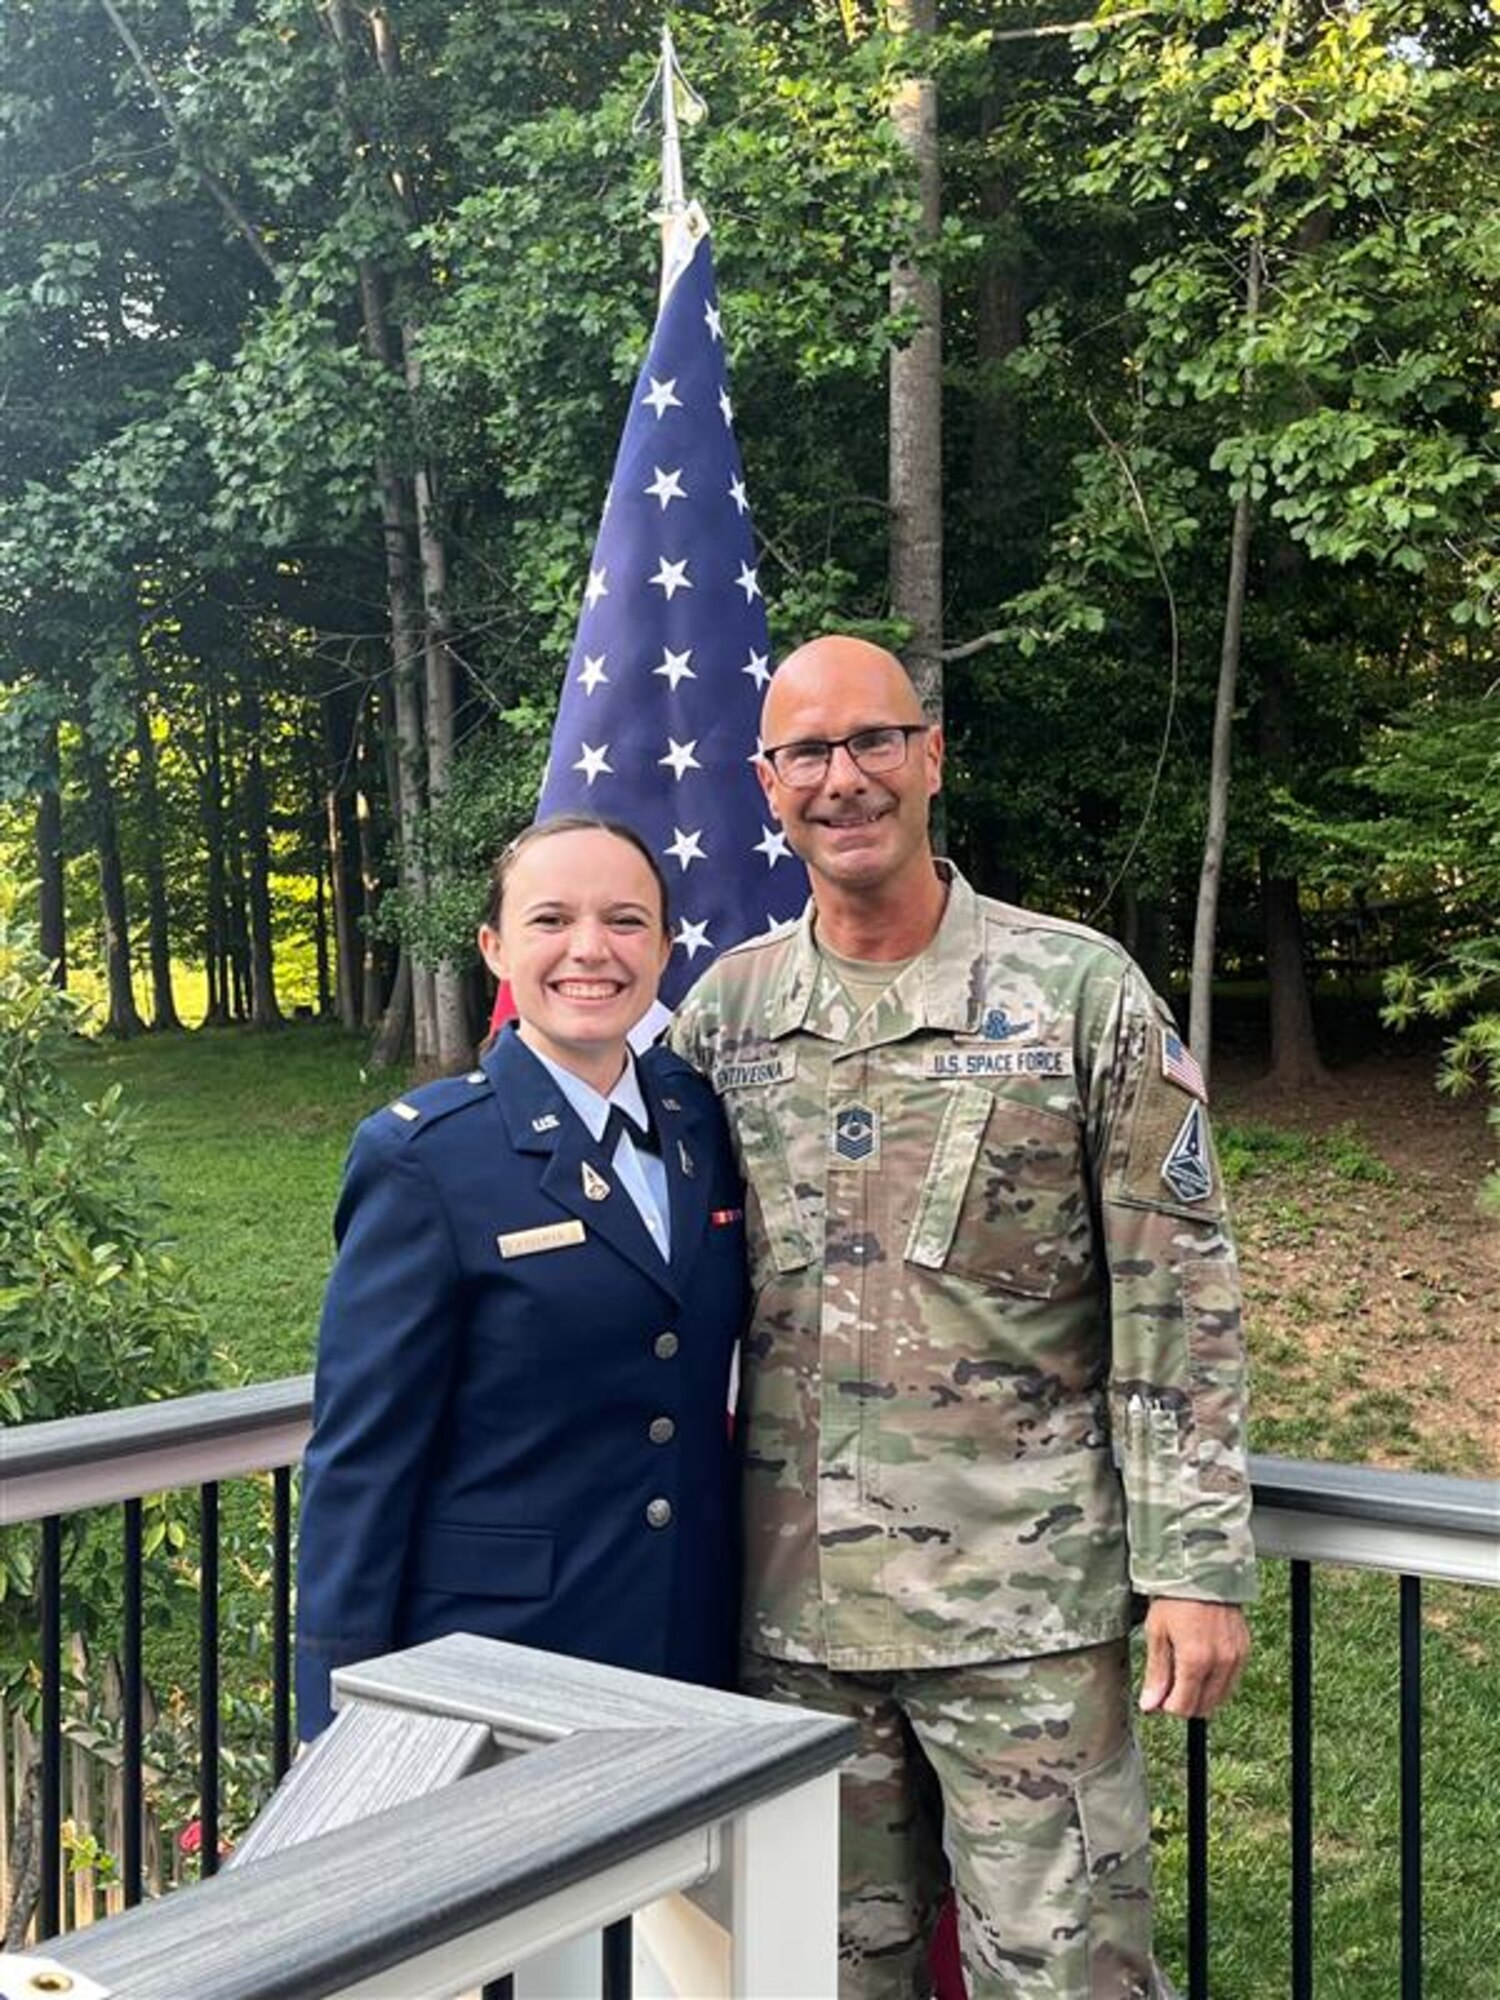 U.S. Space Force 2nd Lt. Josephine Lerner stands with Chief Master Sgt. of the Space Force John F. Bentivegna after administering the oath of office during his Reenlistment Ceremony on August 19, 2023, in Manassas, Virginia.